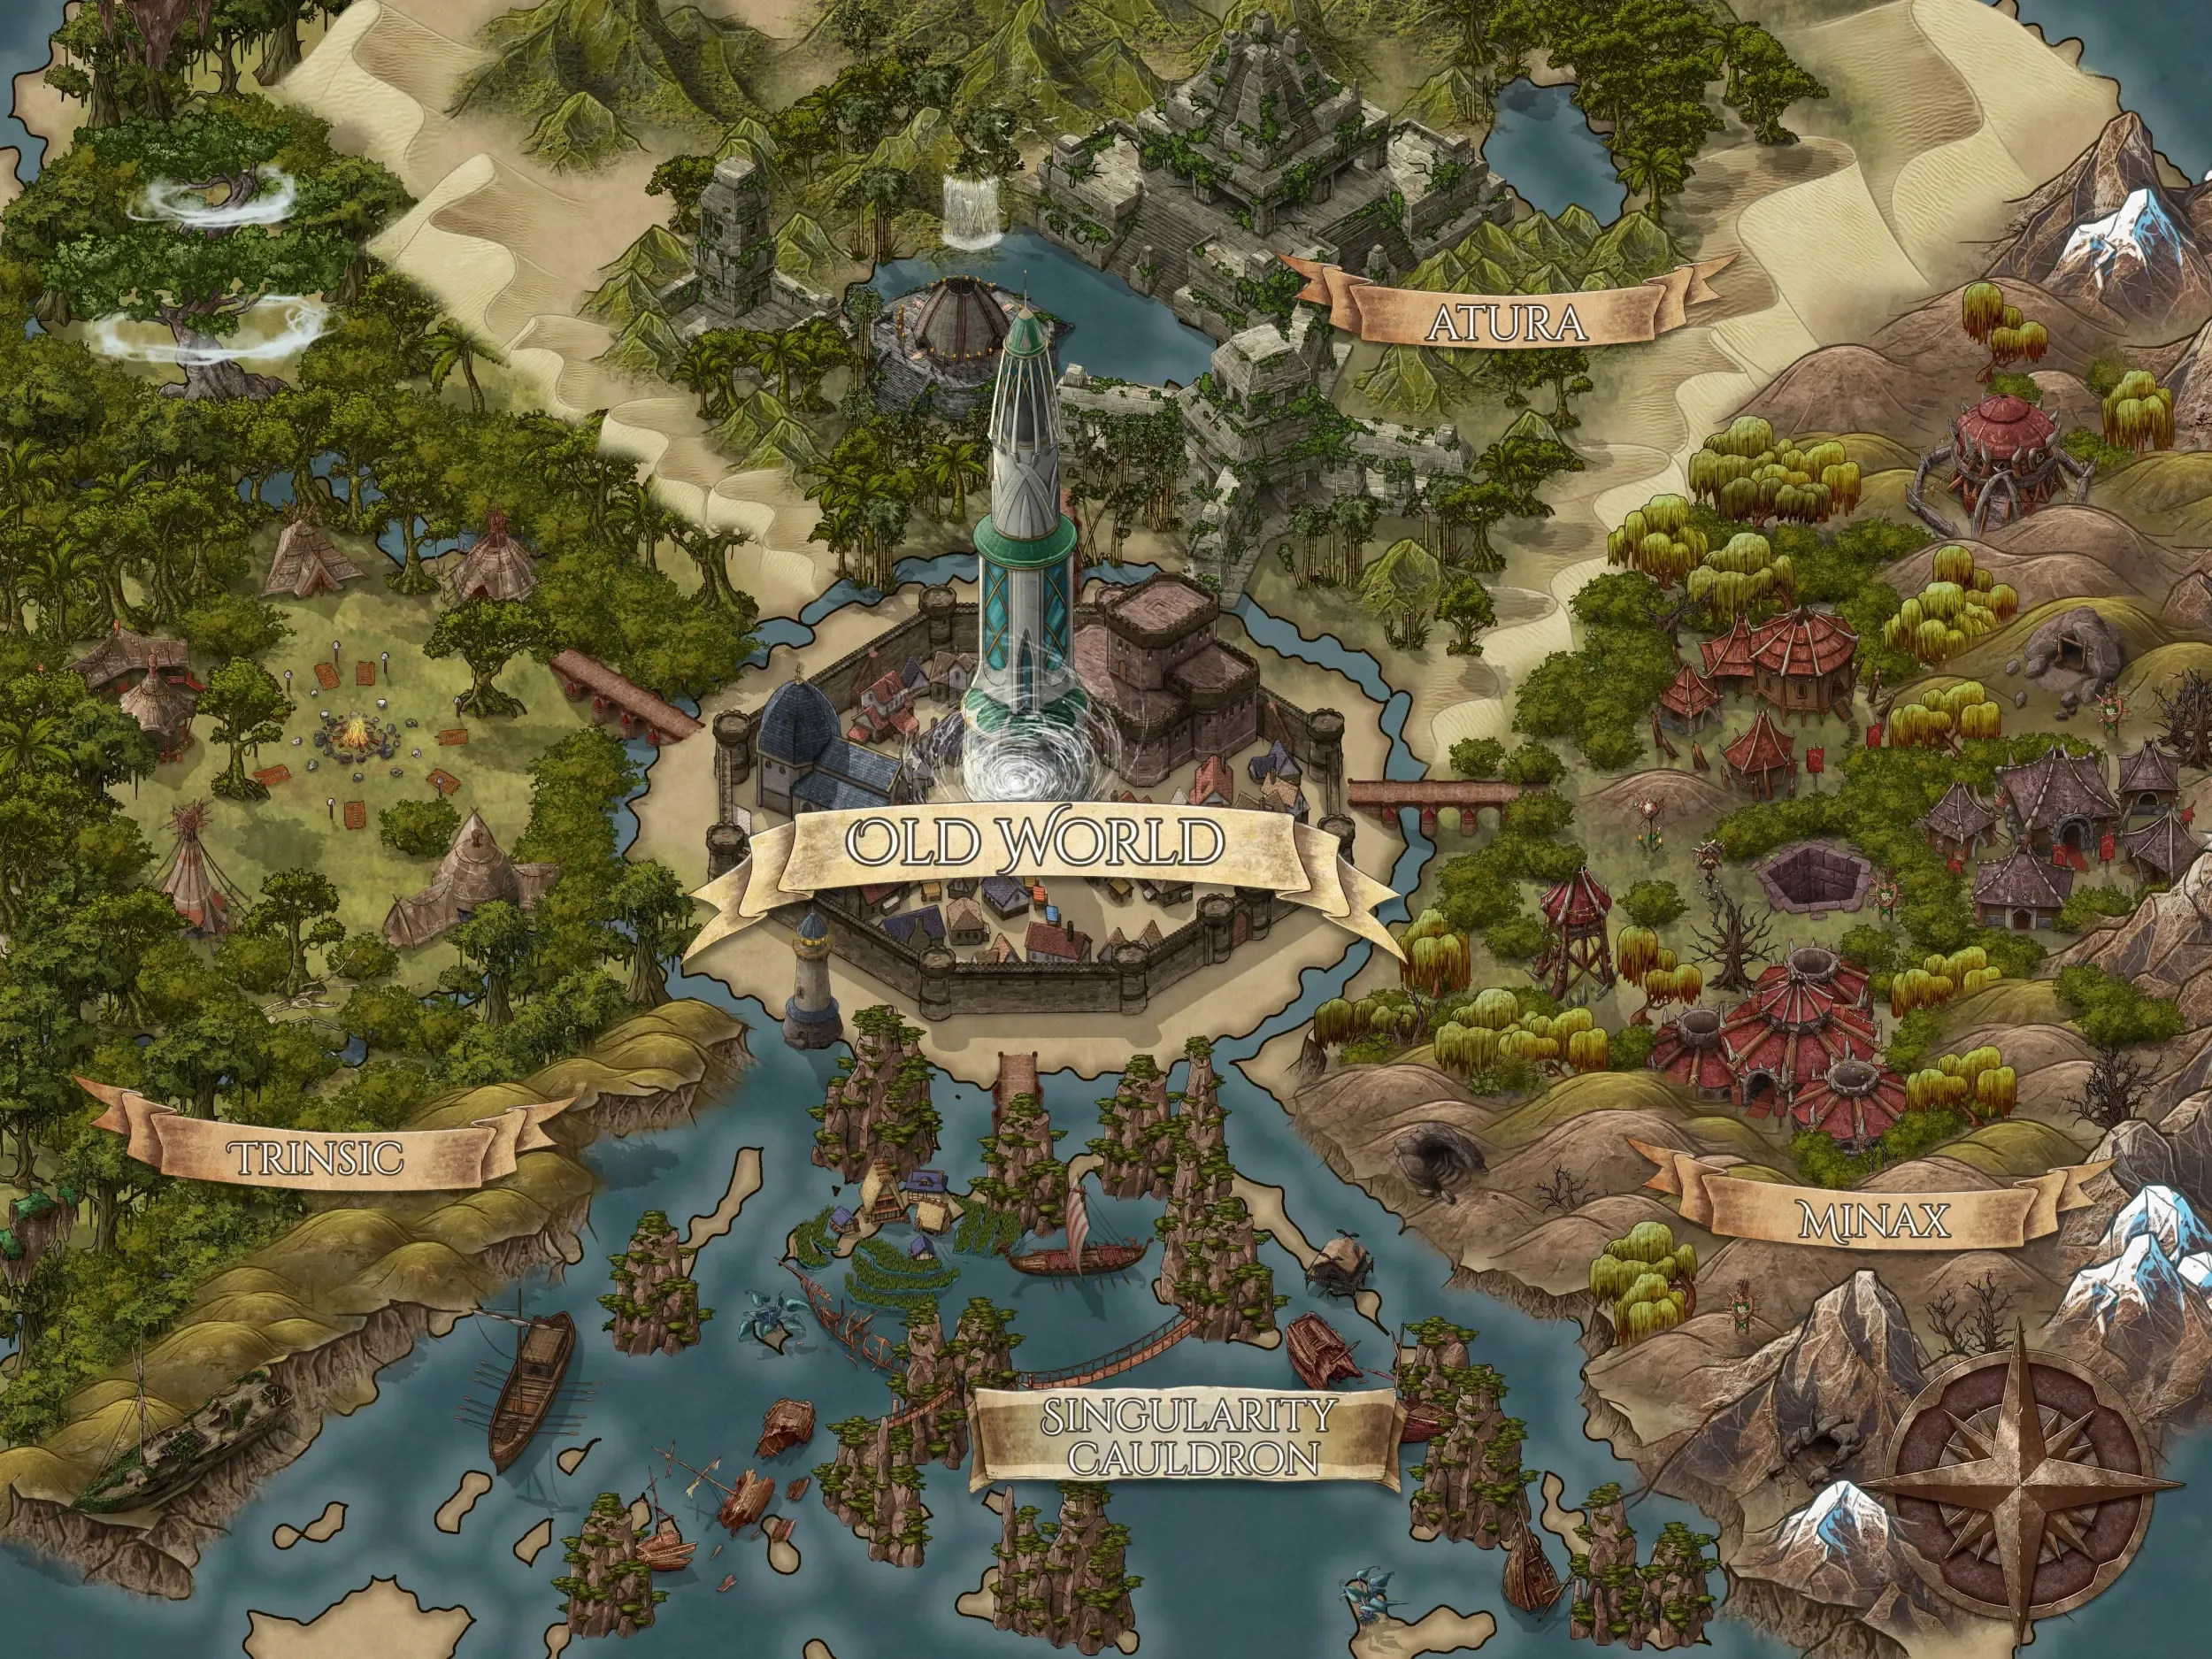 Map showing the Old World and the areas surrounding it. Old World is an isolated region that serves as the safe space for players to engage in PvP battles.